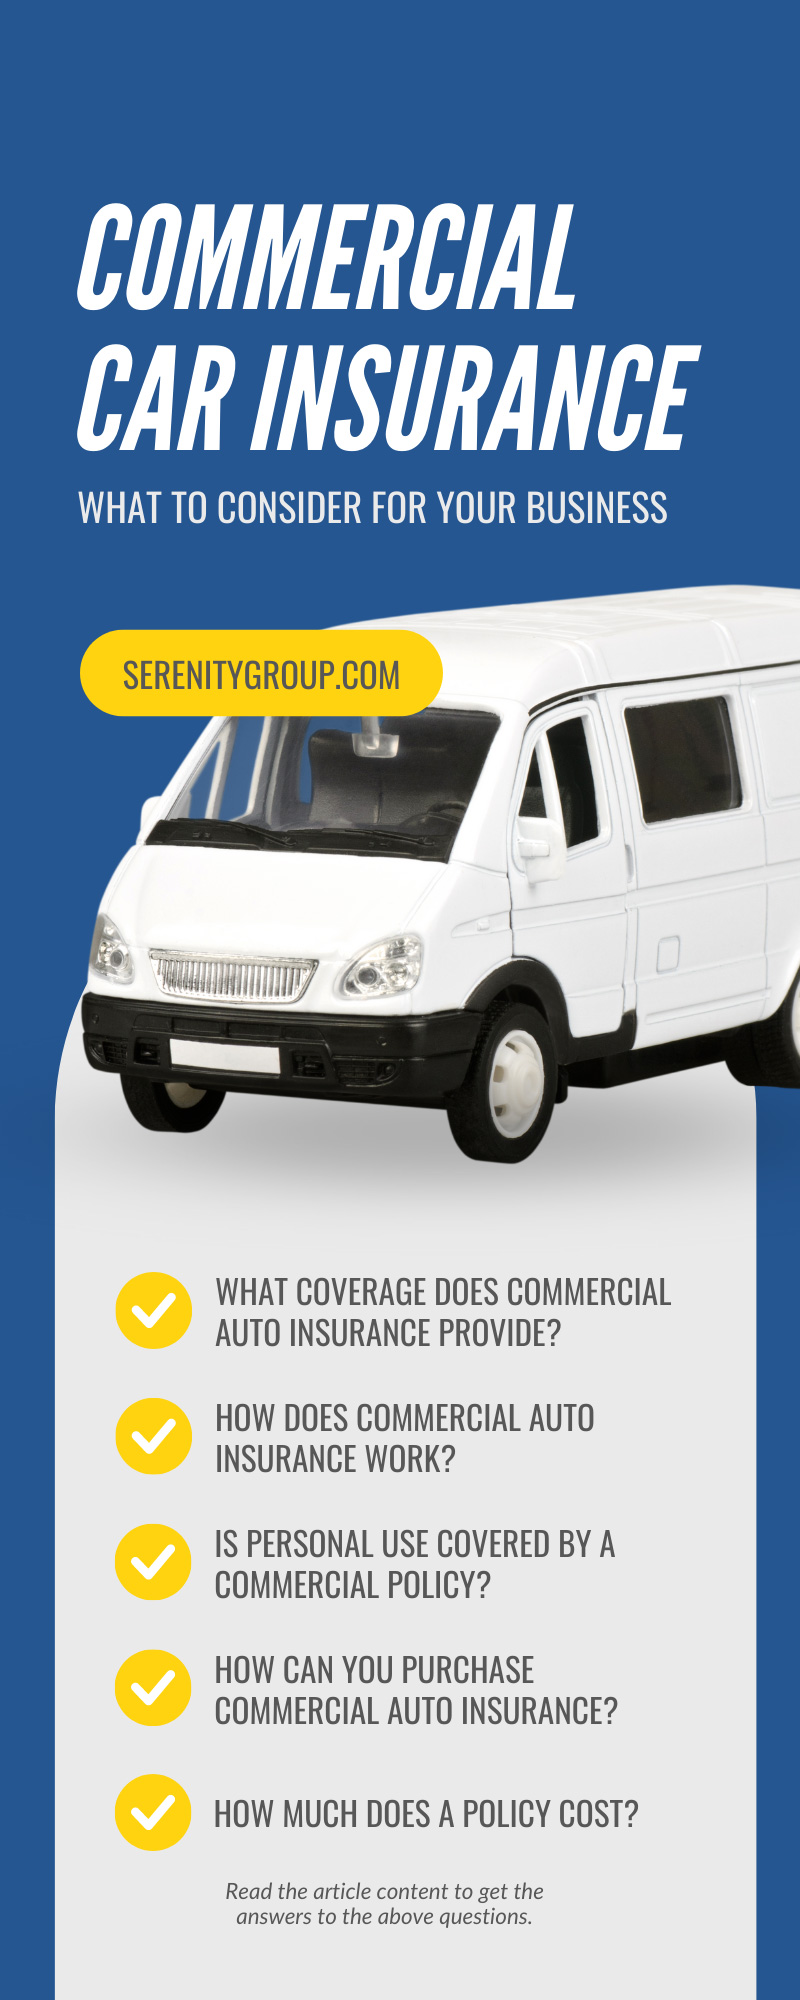 Commercial Car Insurance: What To Consider for Your Business